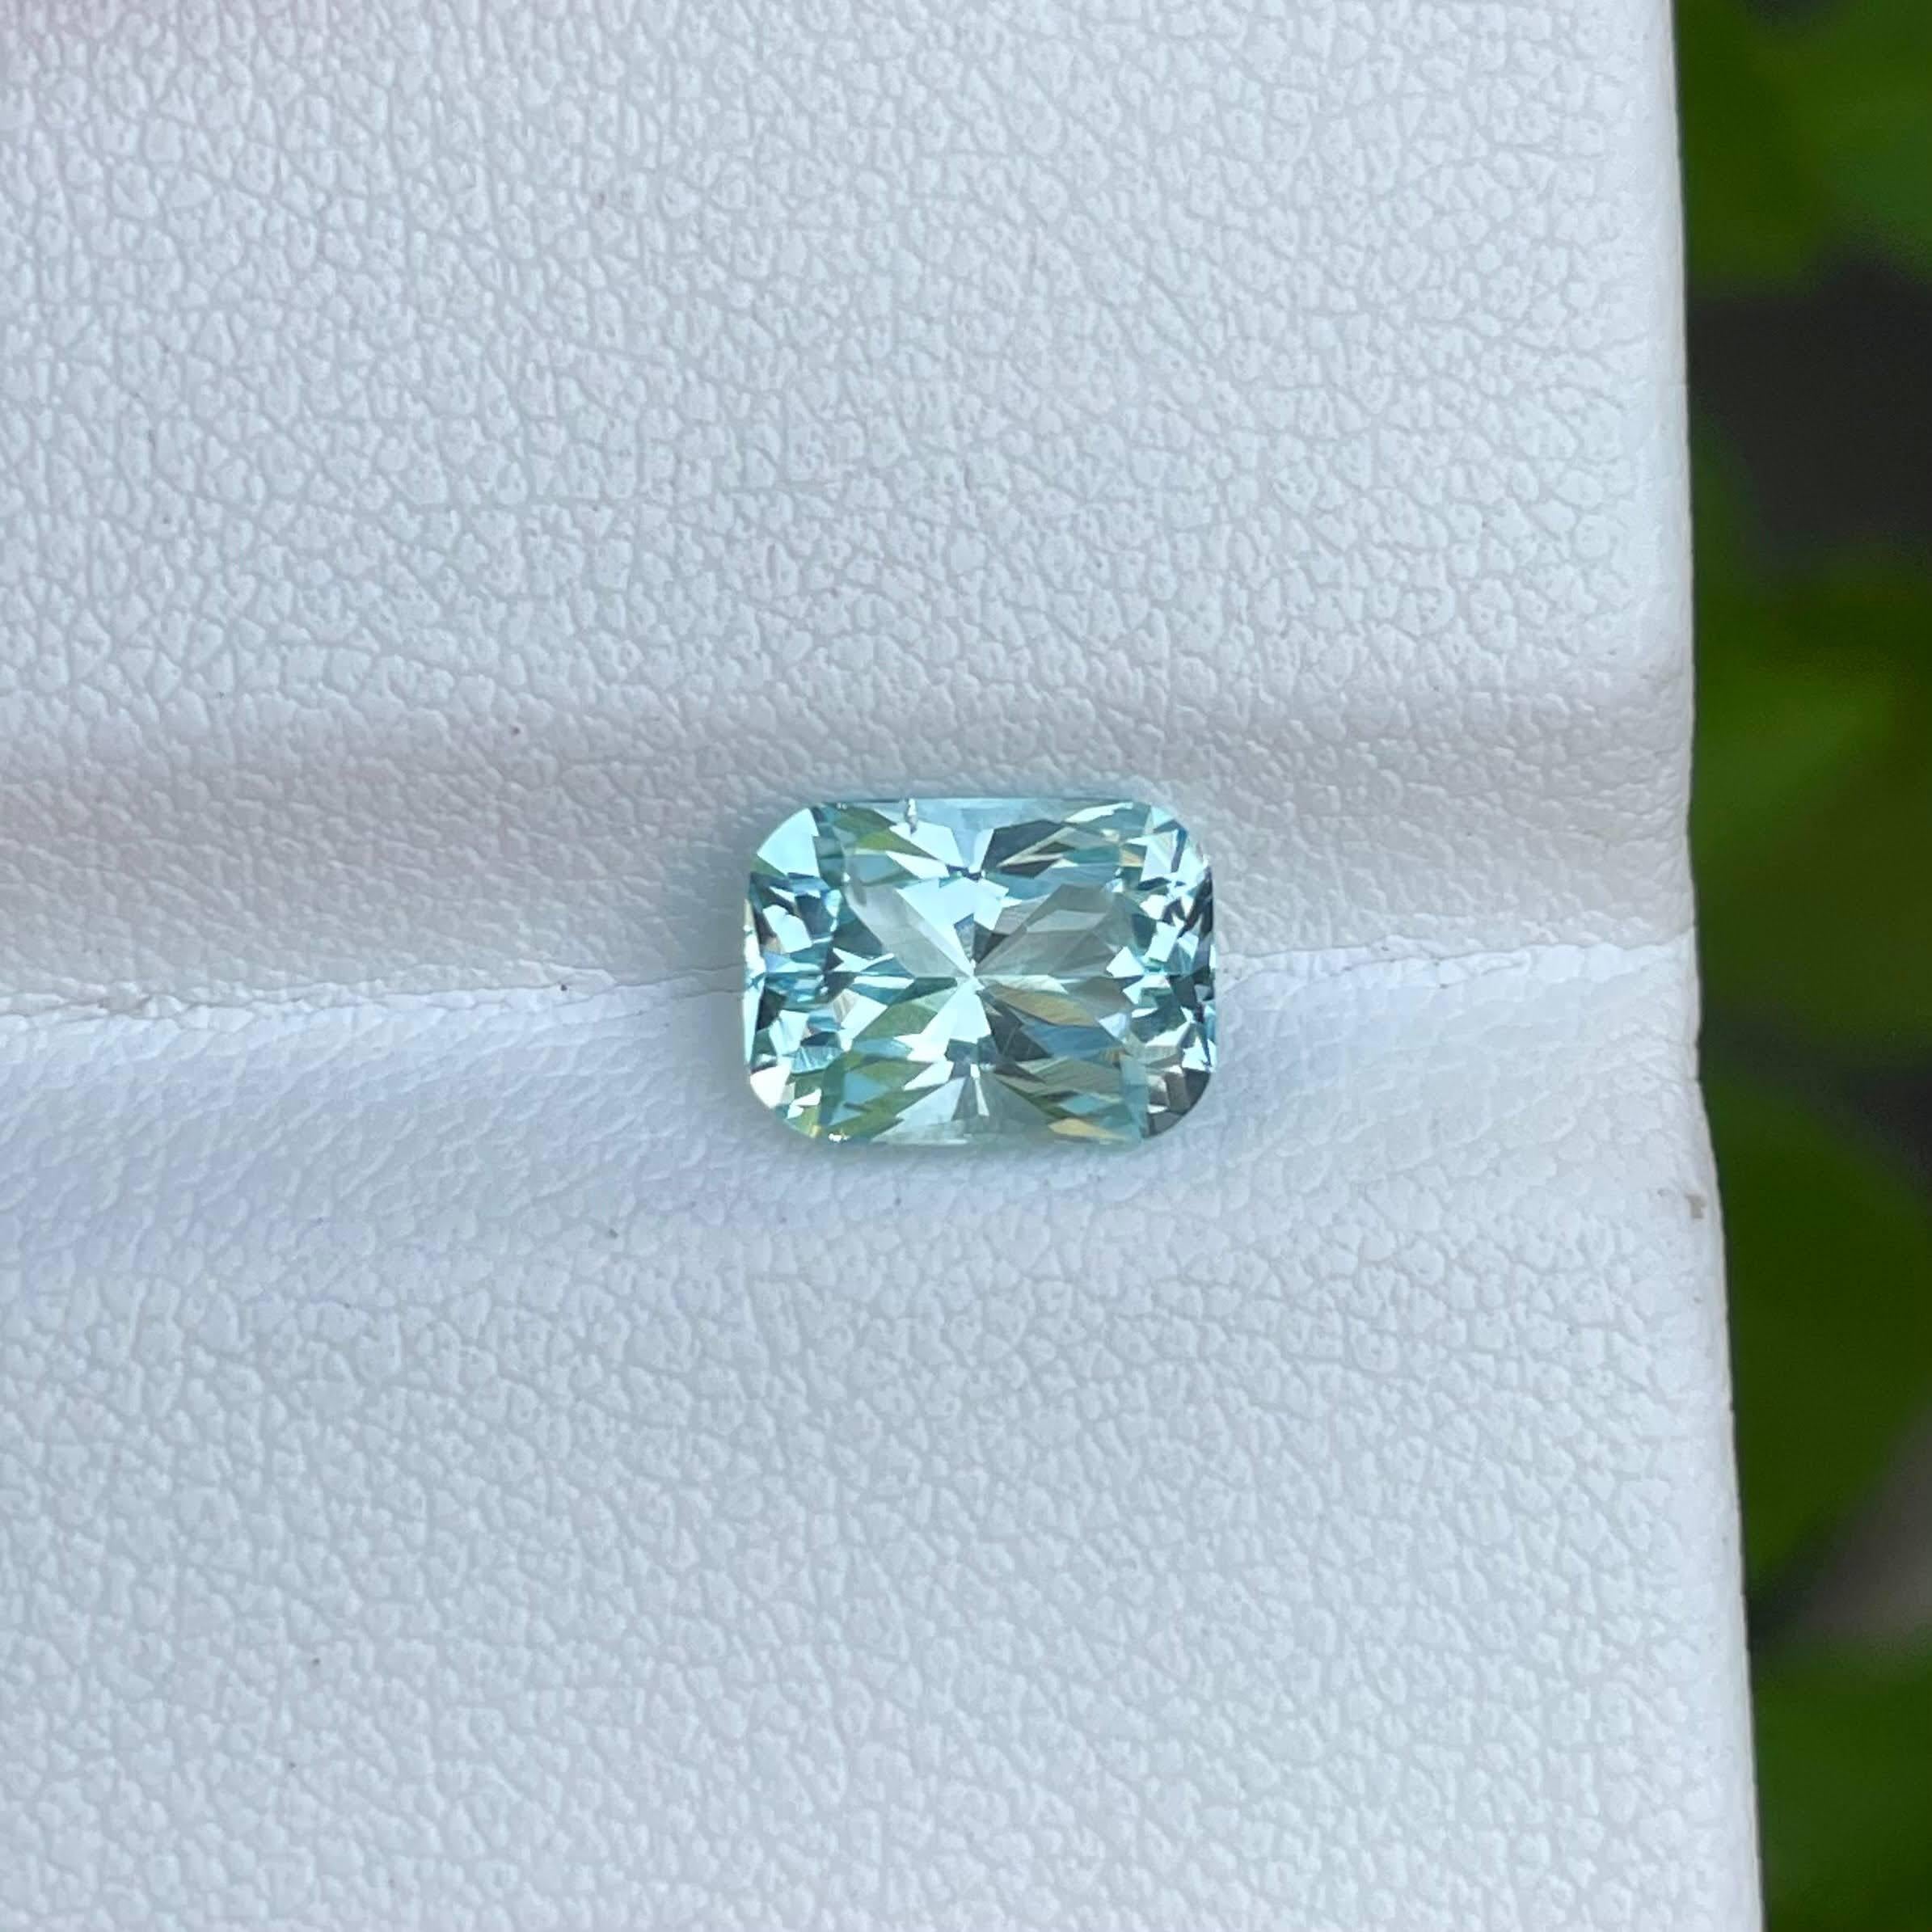 Weight 1.65 carats 
Dimensions 8.3x6.12x4.92 mm
Treatment none 
Origin Nigeria 
Clarity VVS
Shape cushion
Cut custom precision 





This exquisite gemstone boasts a captivating 1.65 carat Aquamarine of unparalleled quality, sourced from the rich